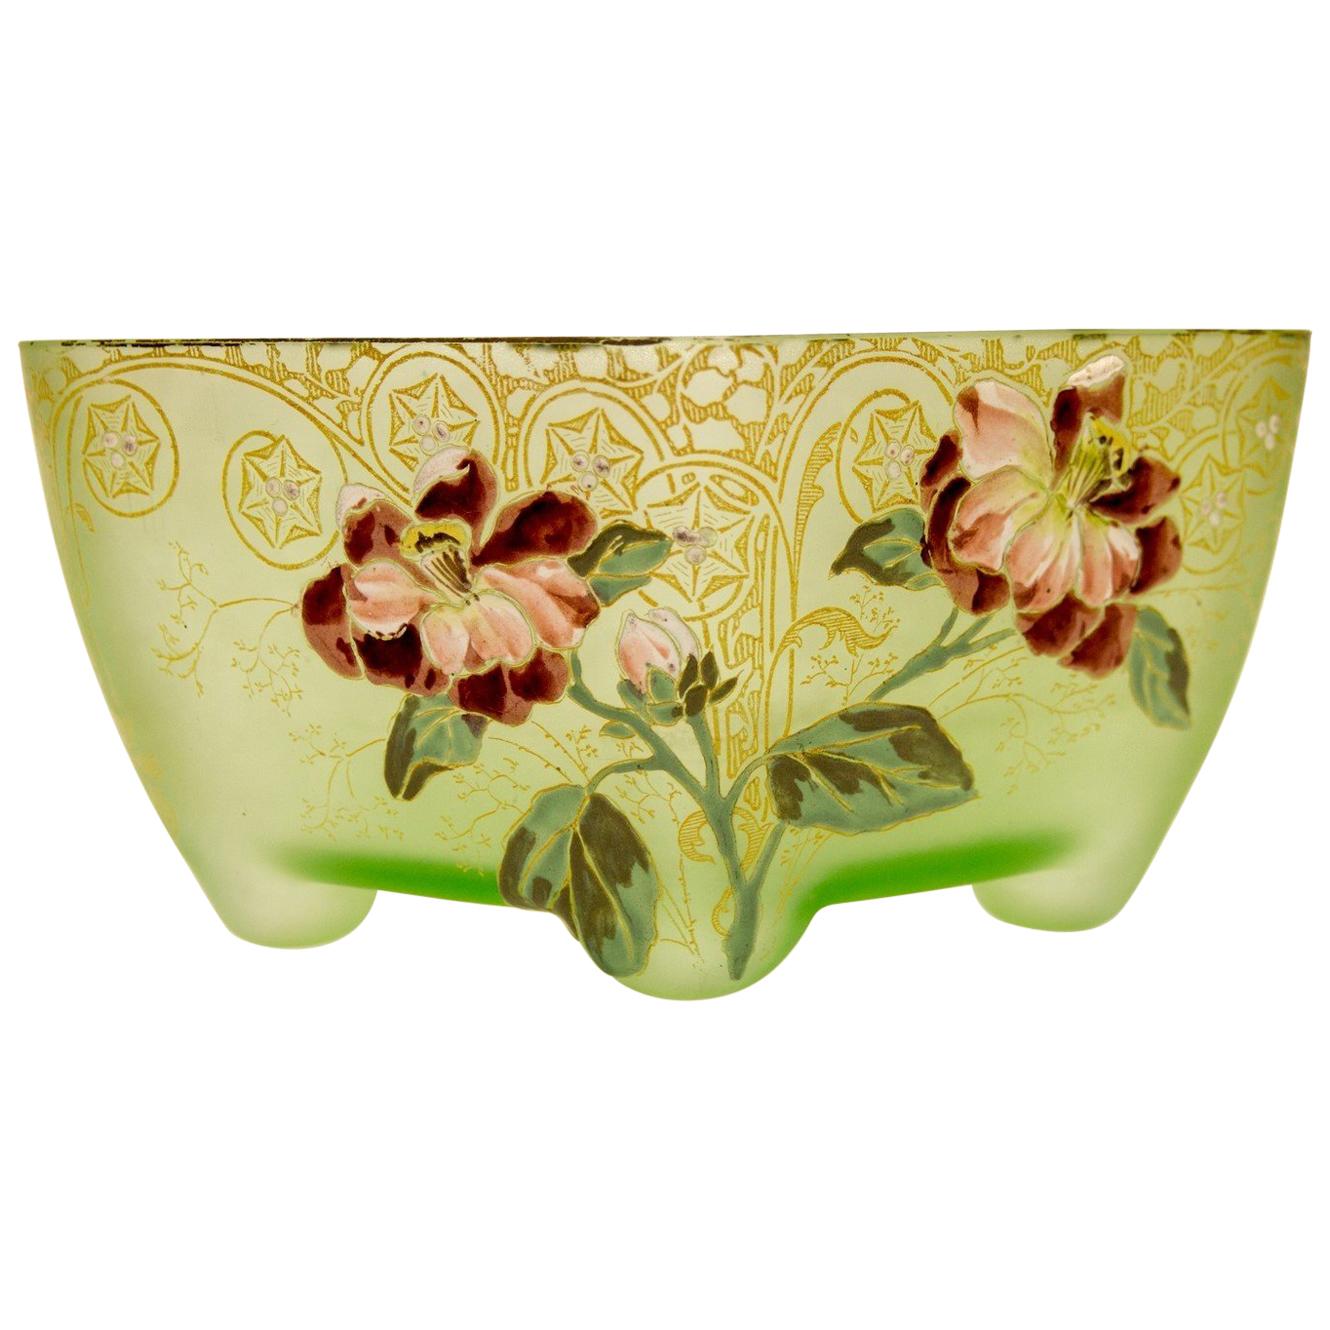 Art Nouveau Square Glass Bowl with Flowers and Ornaments